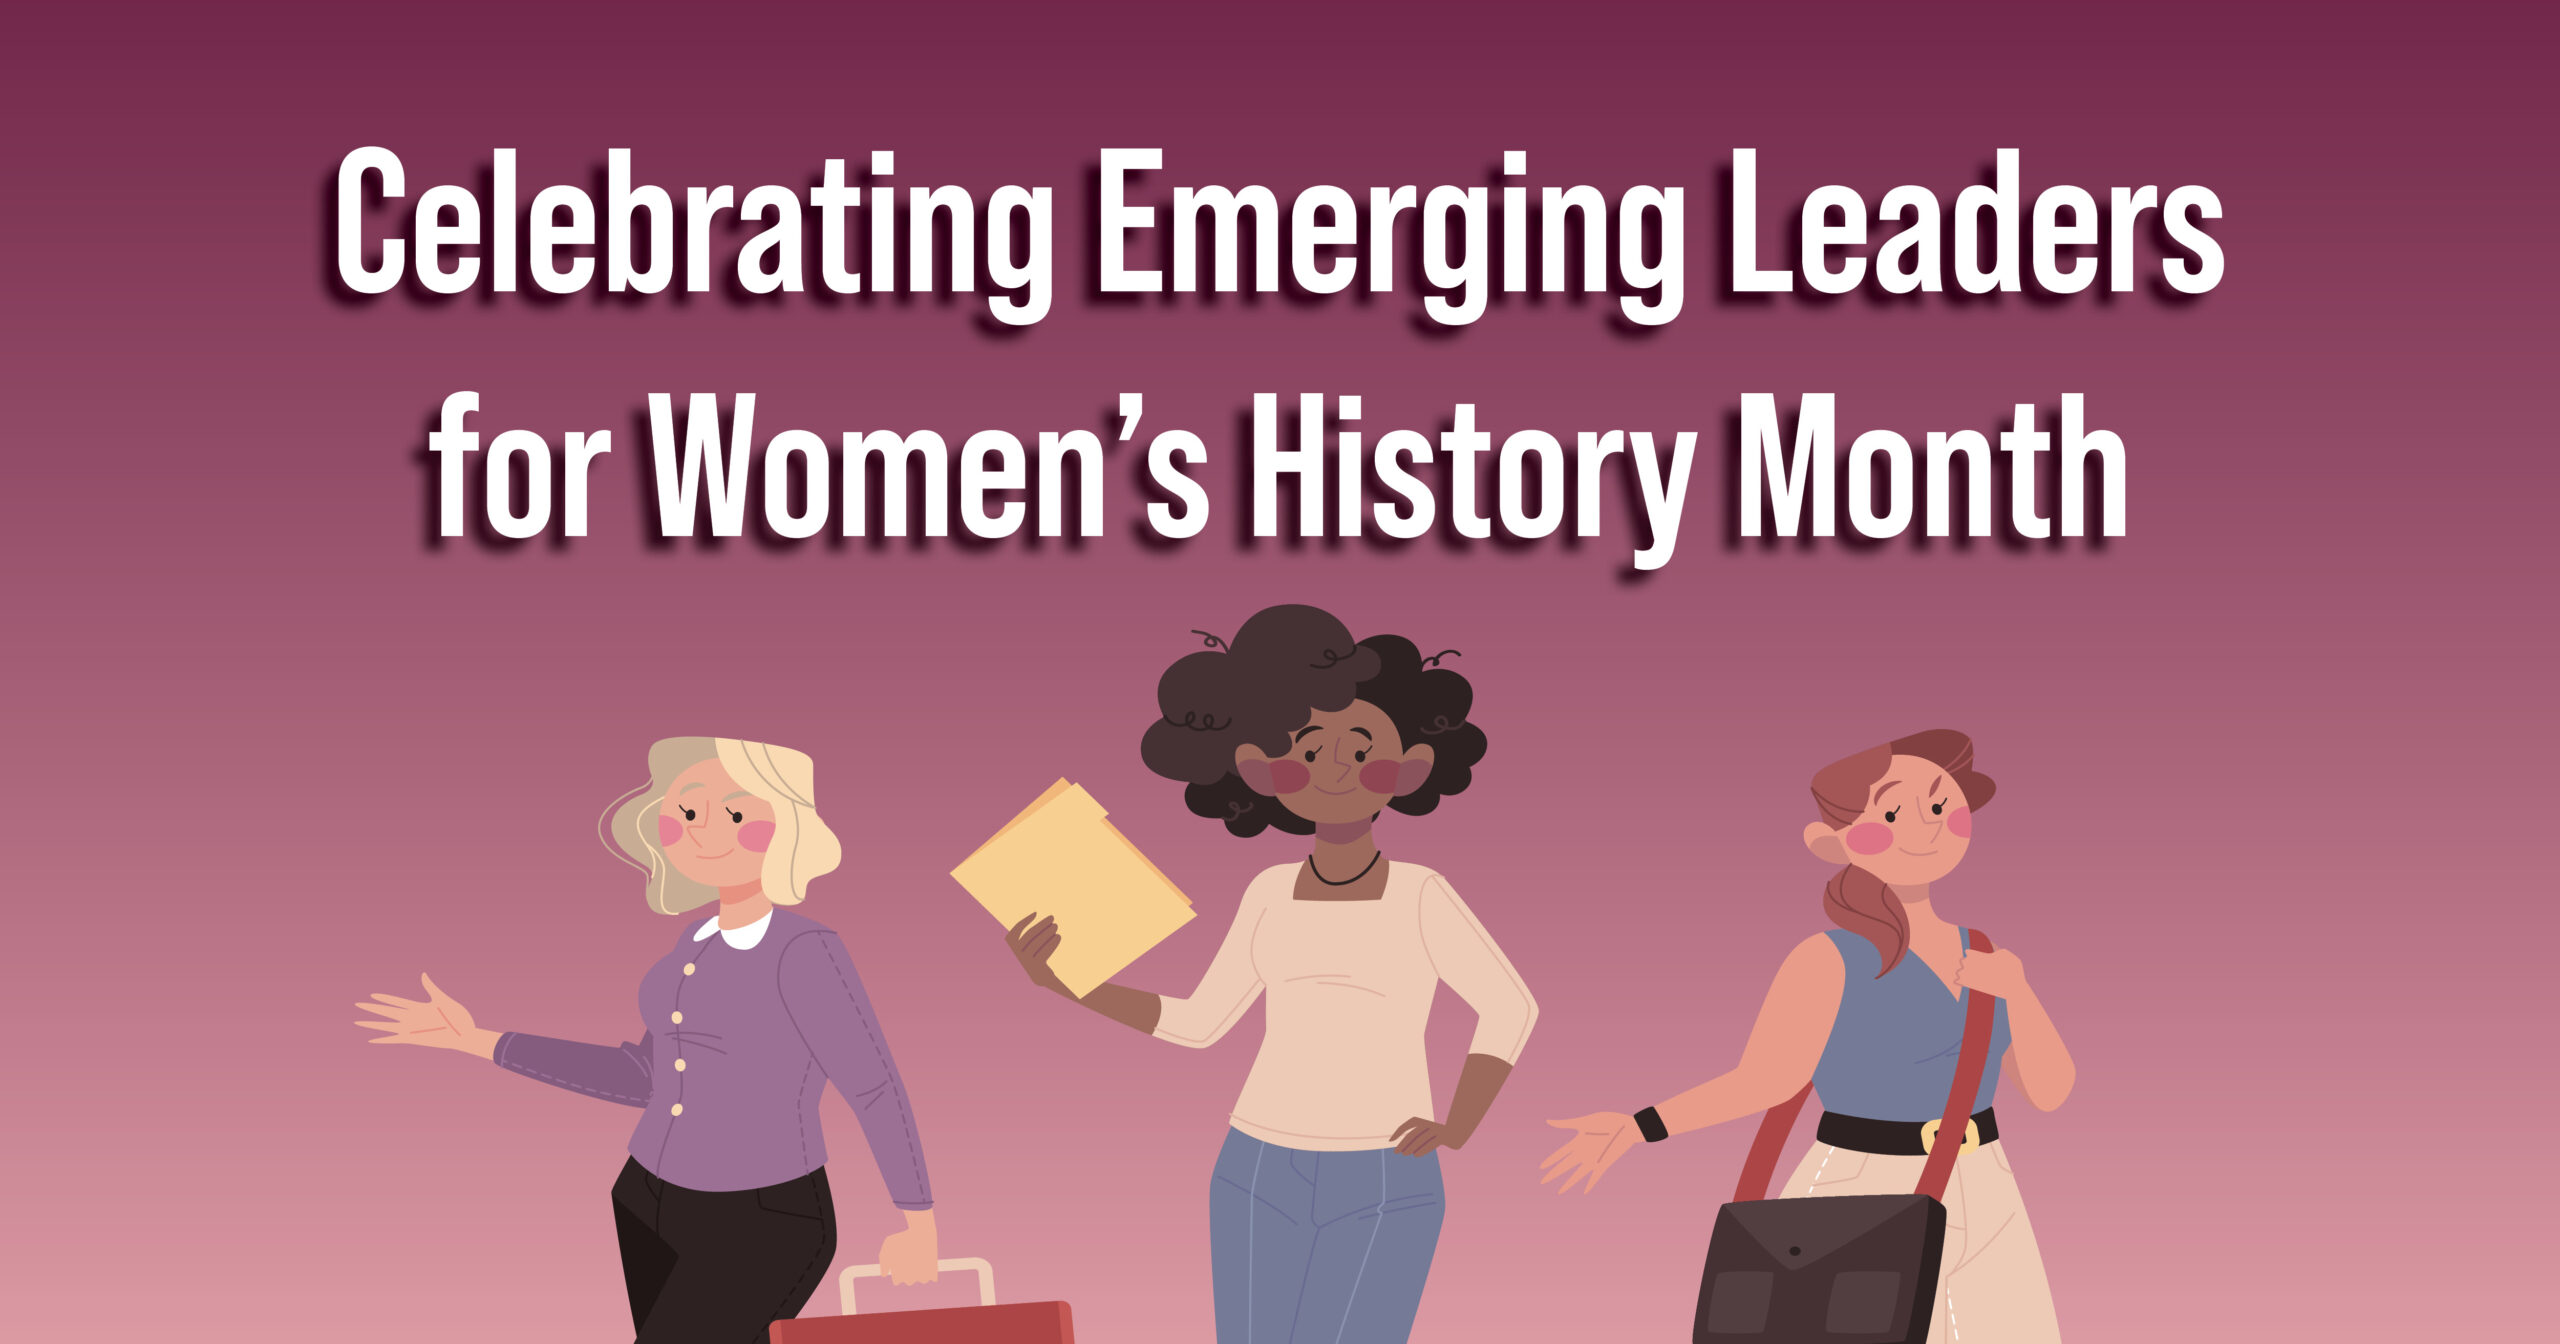 Women's History Month Emerging Leaders Graphic